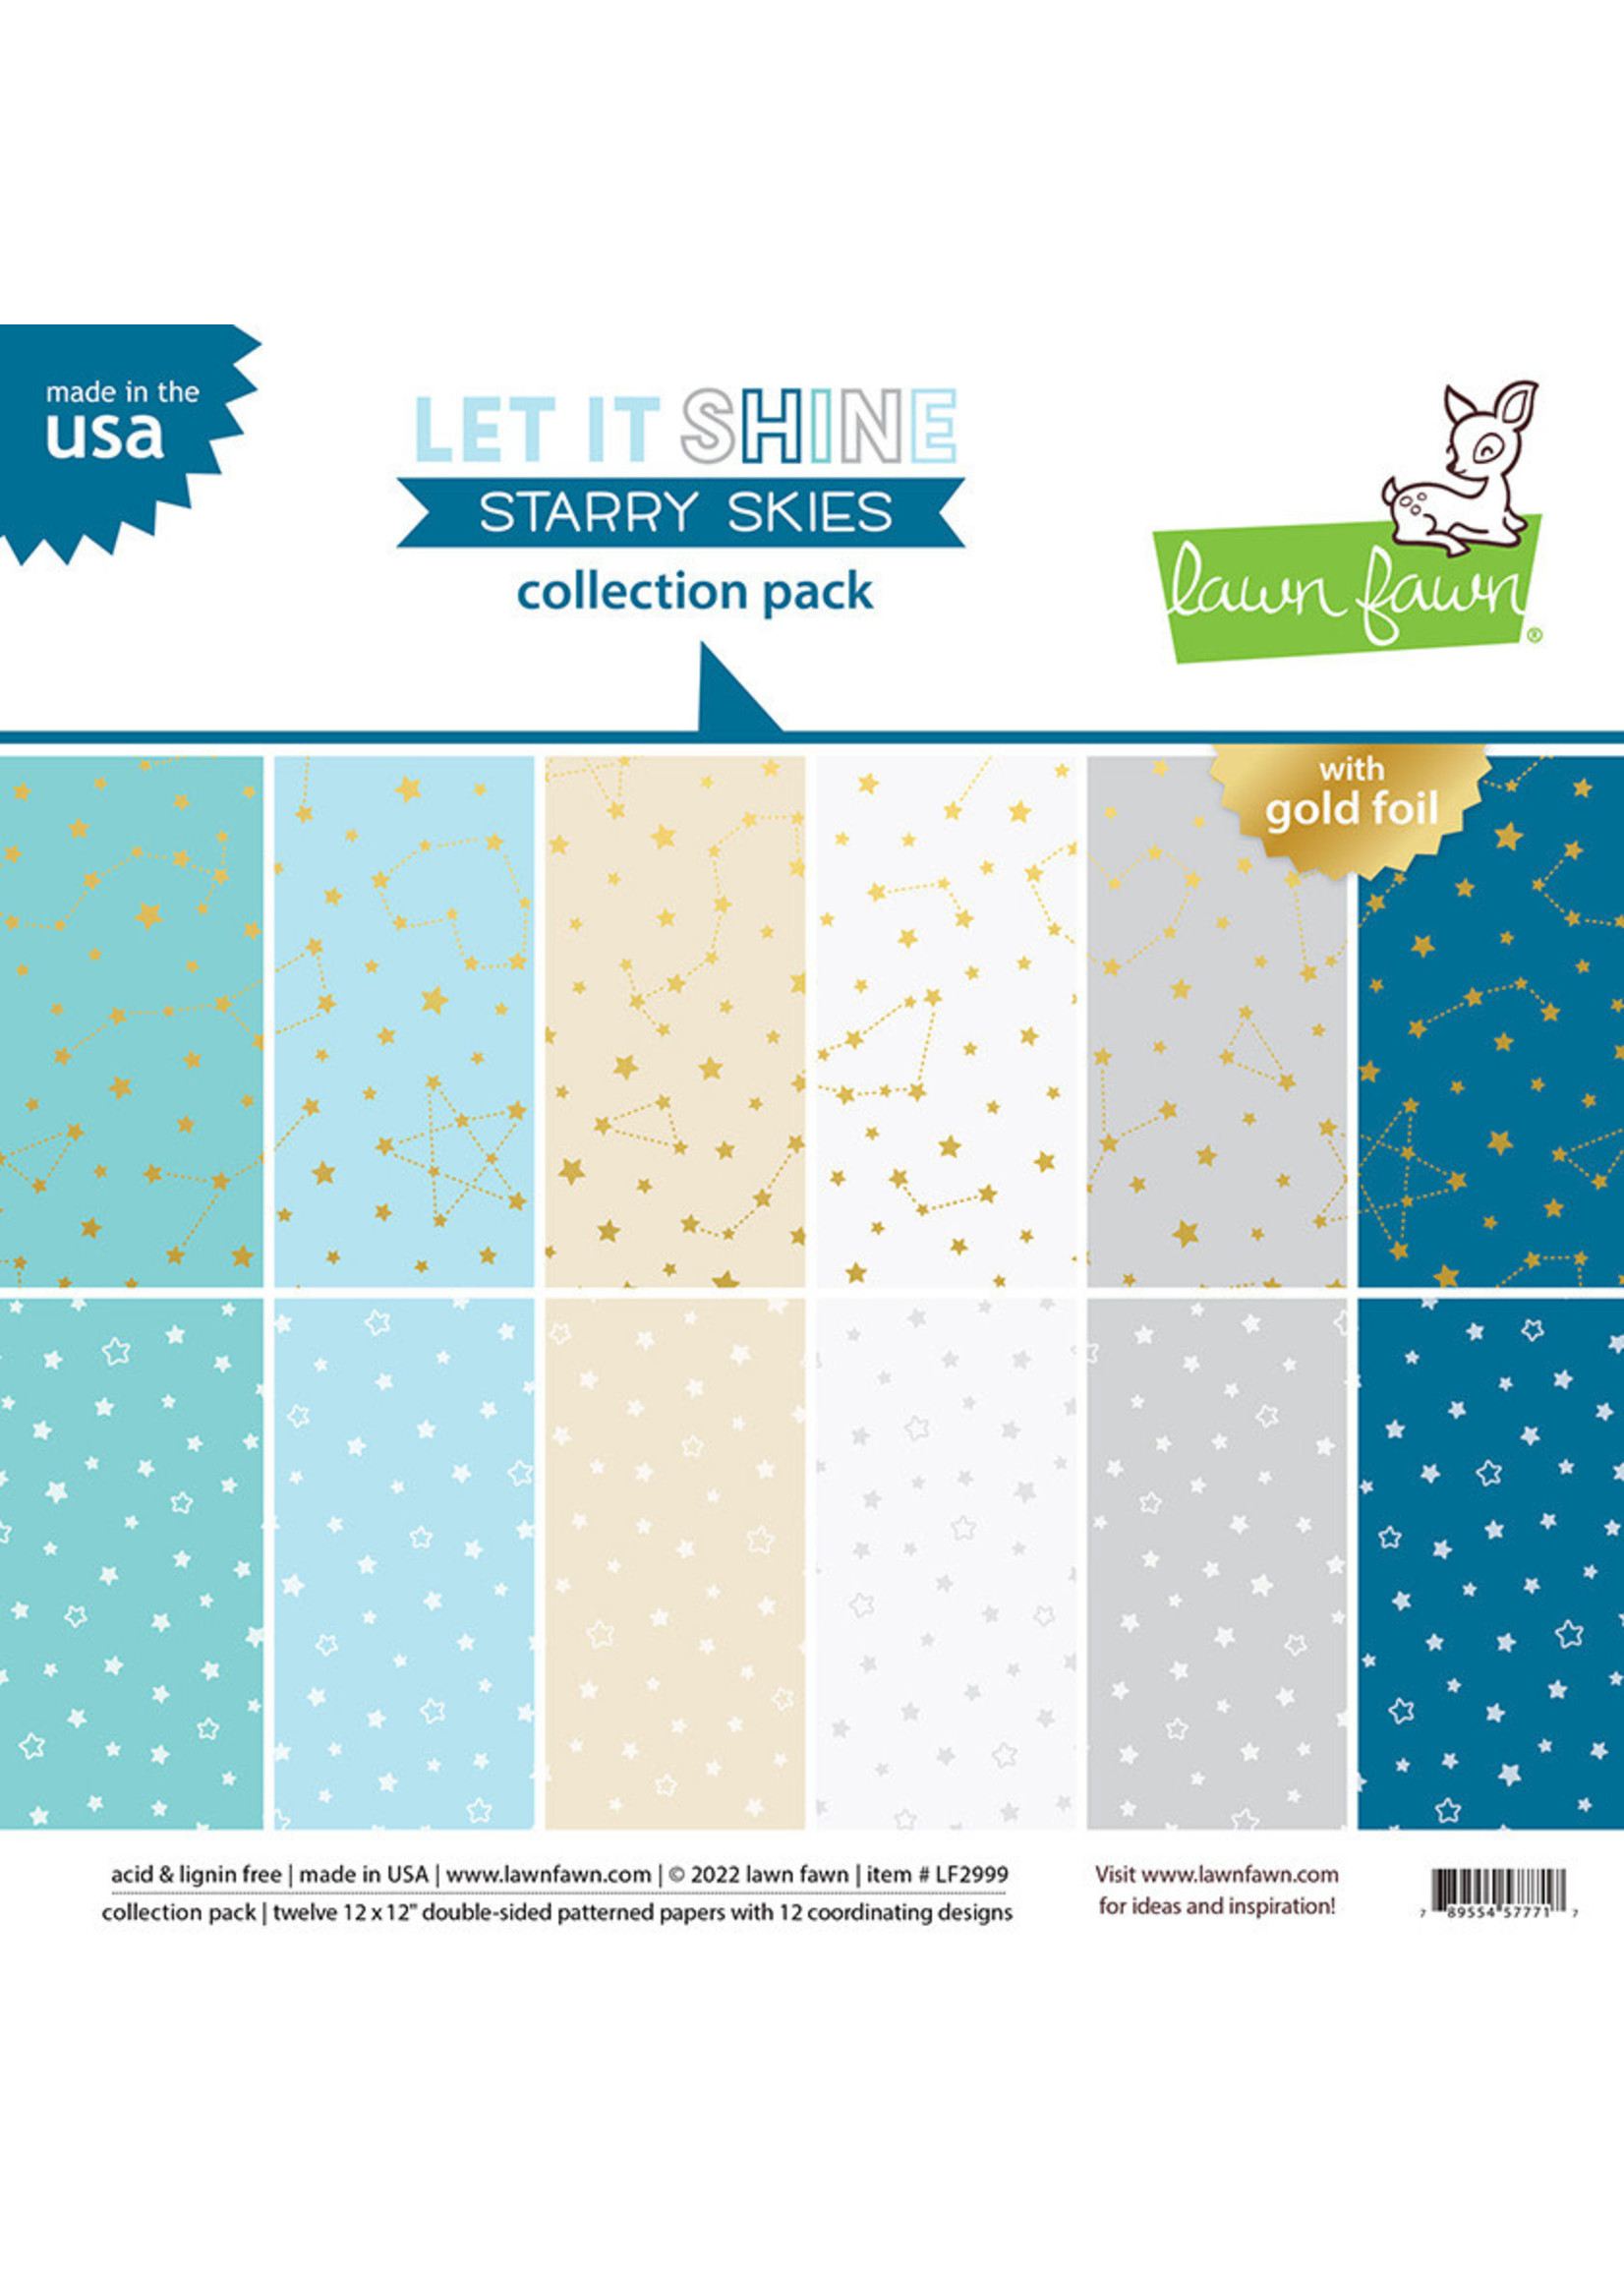 Lawn Fawn Lawn Fawn 12x12 Collection Pack, Starry Skies